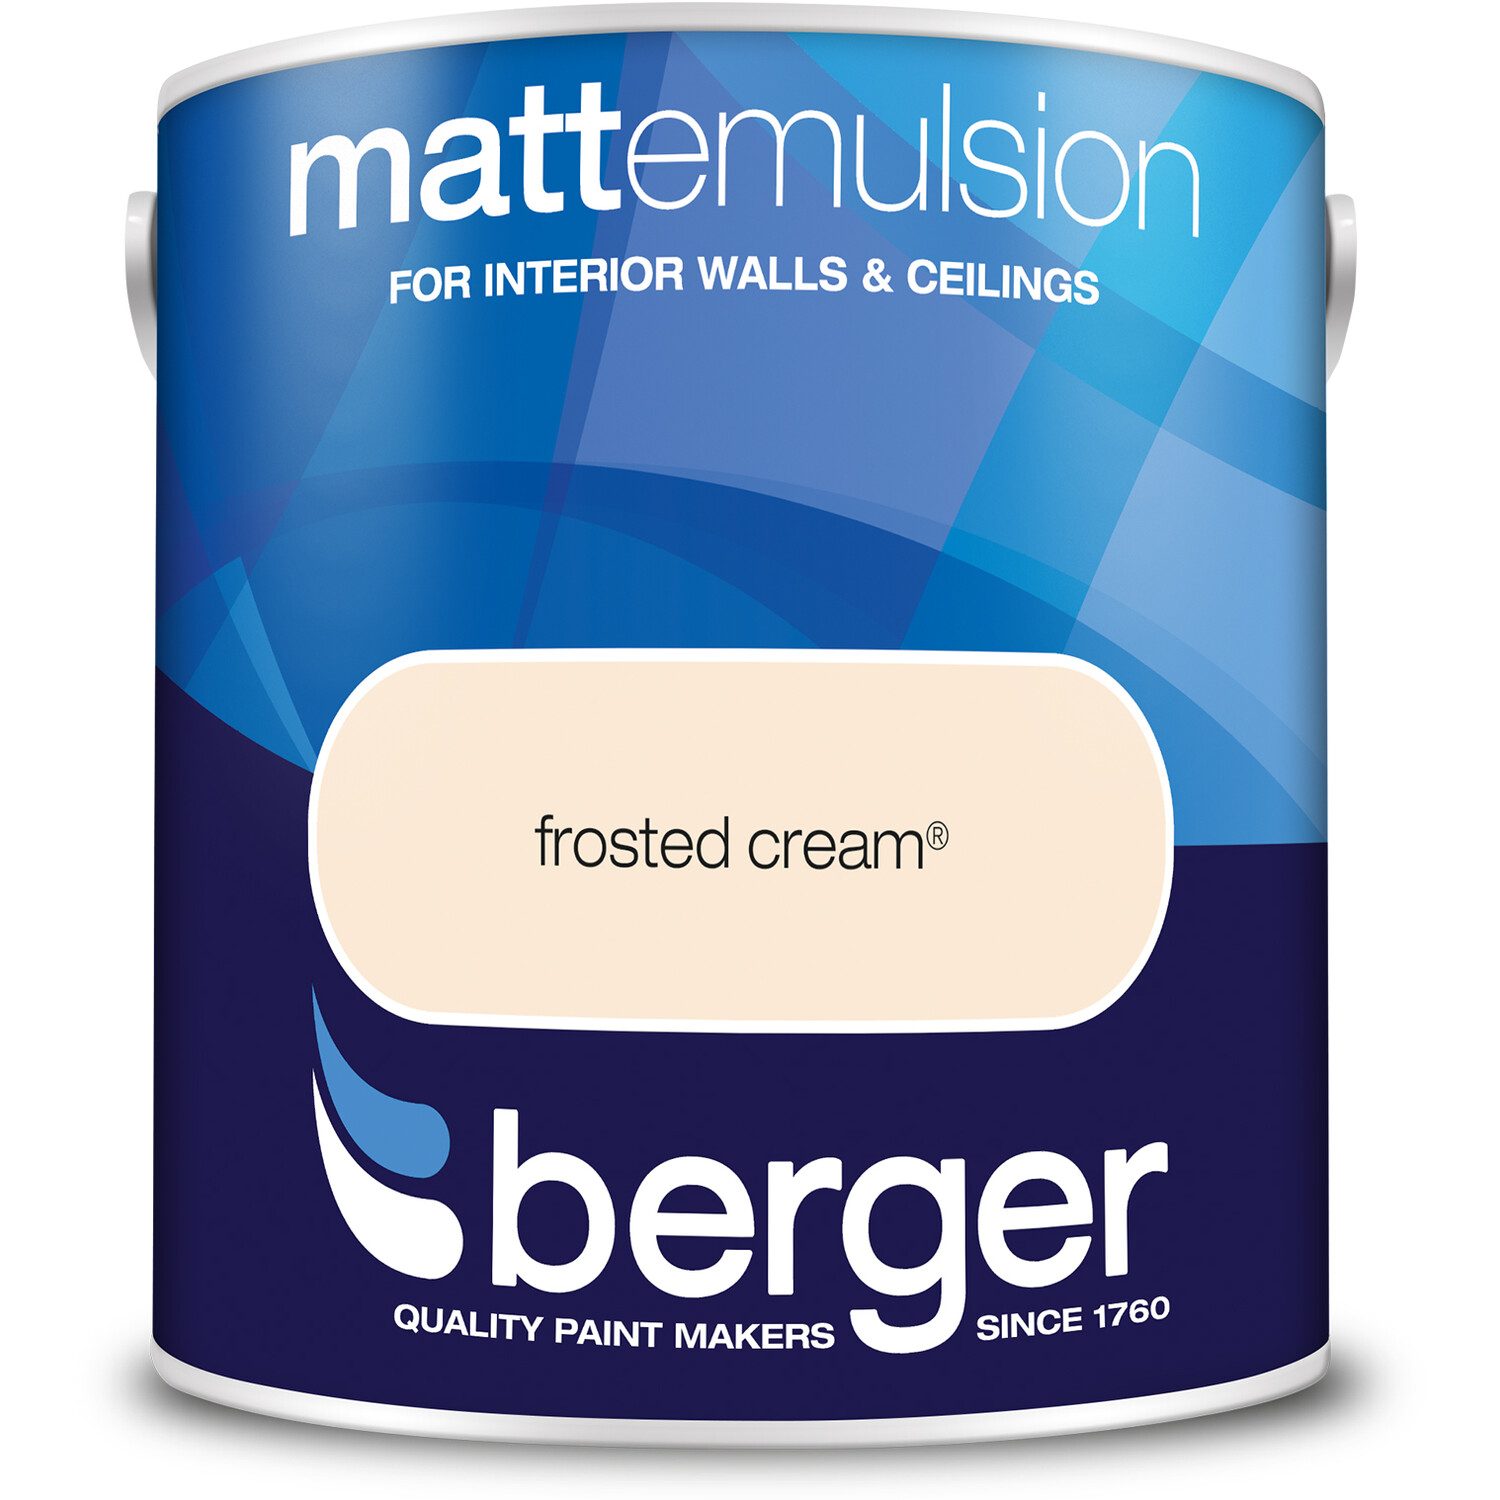 Berger Walls and Ceilings Frosted Cream Matt Emulsion Paint 2.5L Image 2